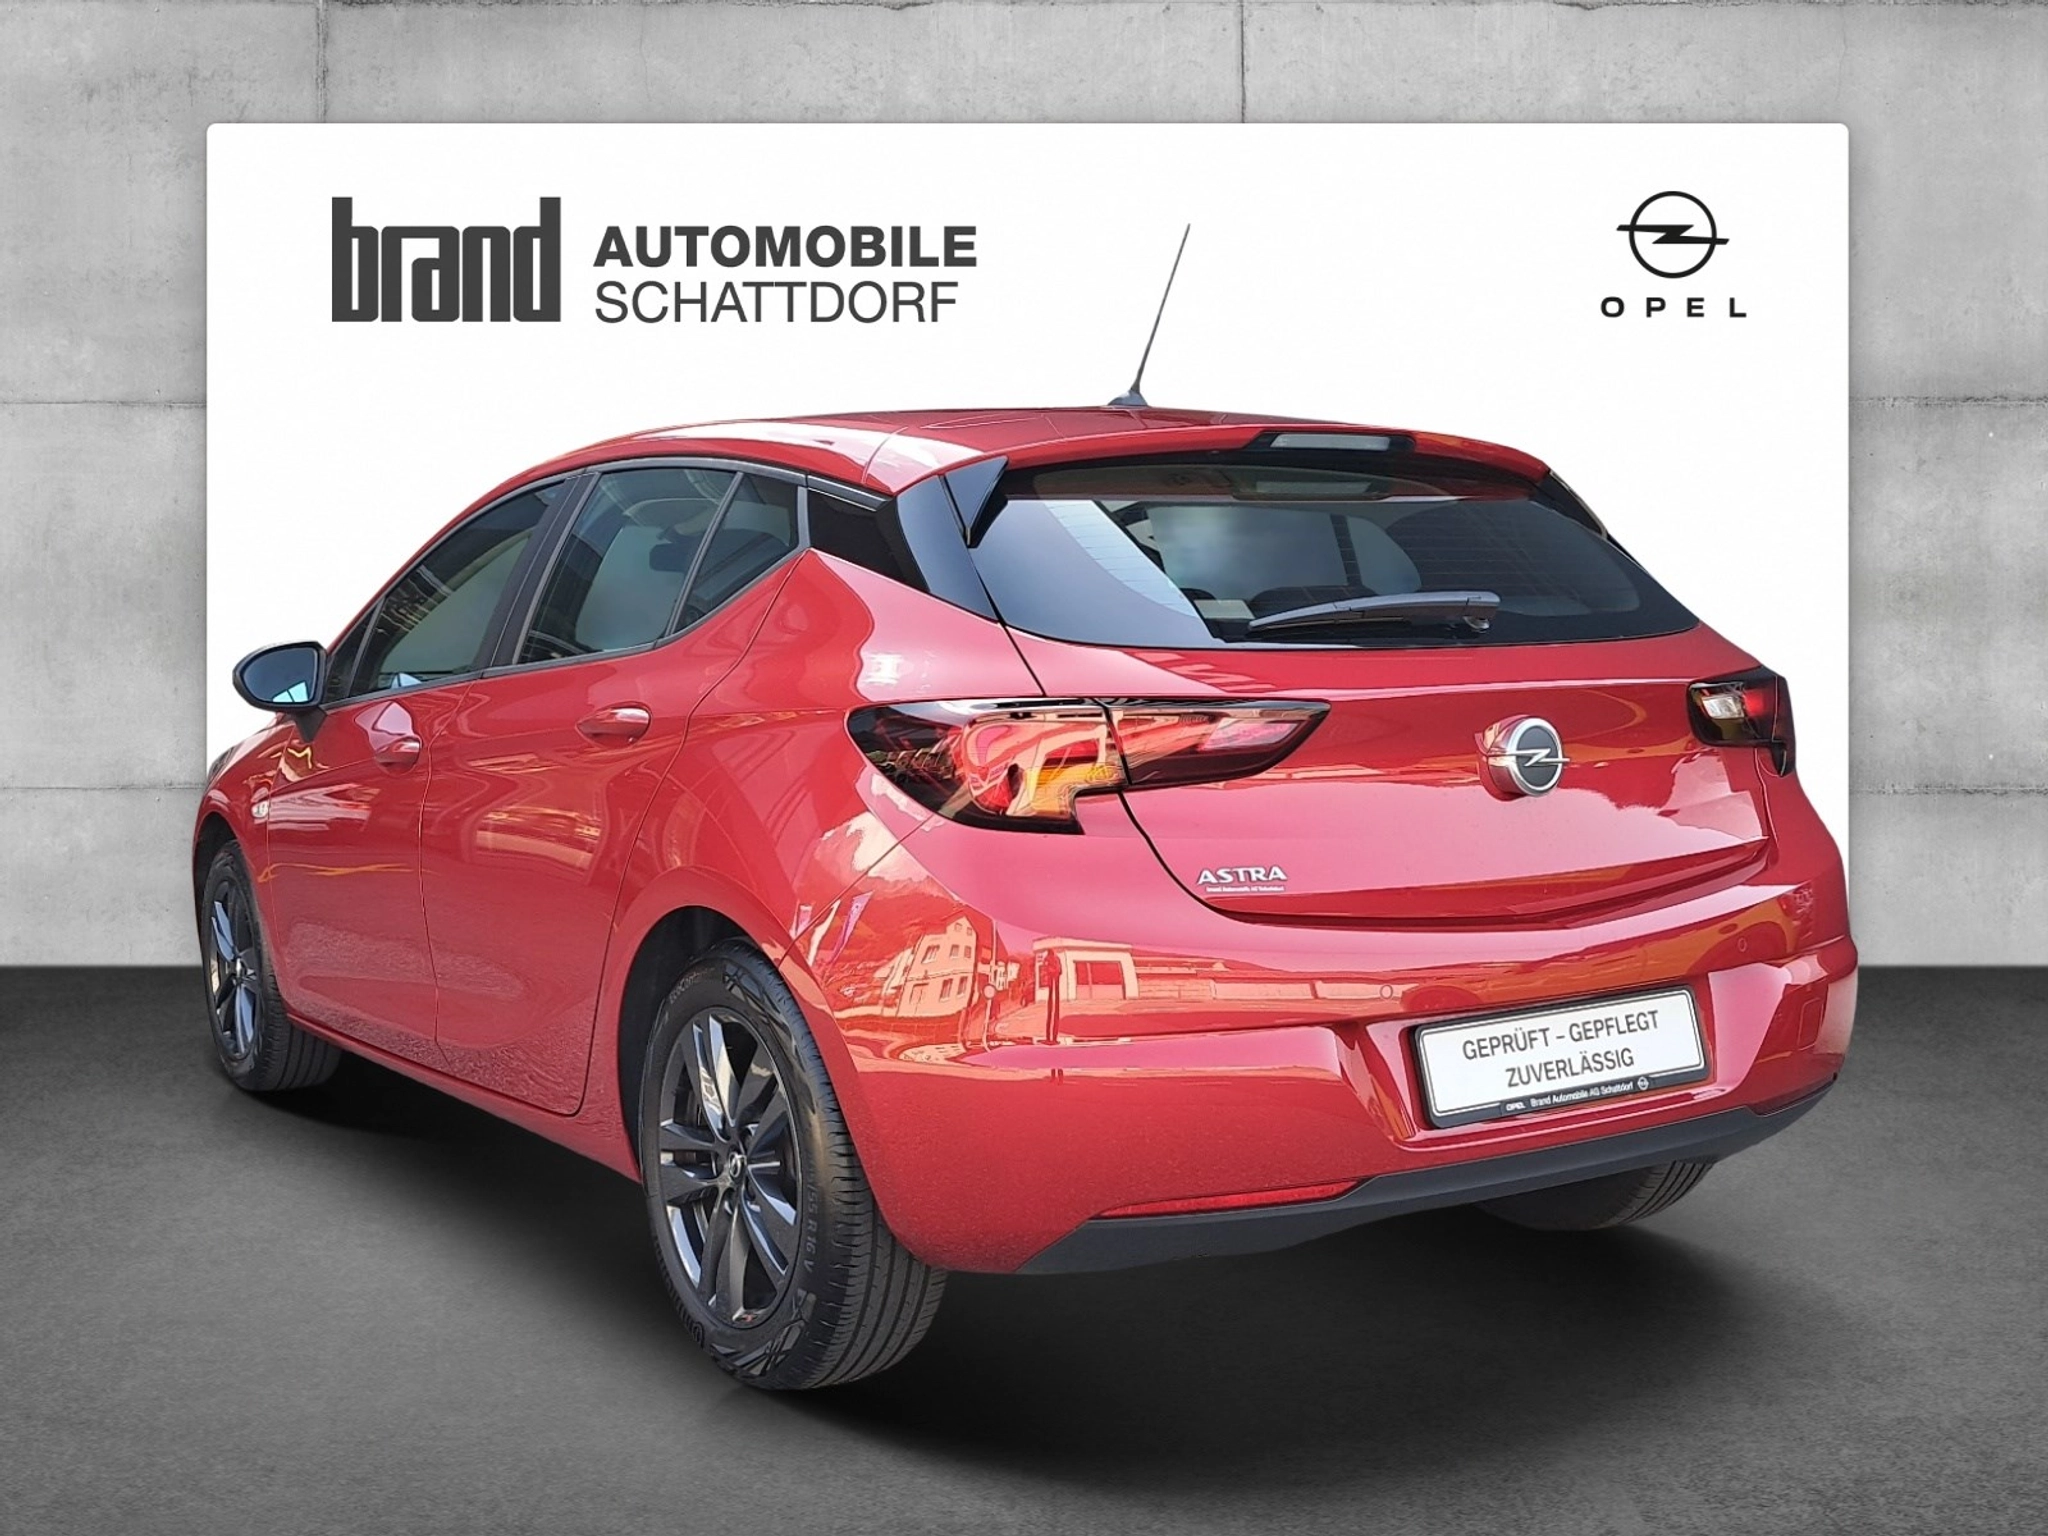 Opel Astra Leasing in Switzerland from CHF 210 